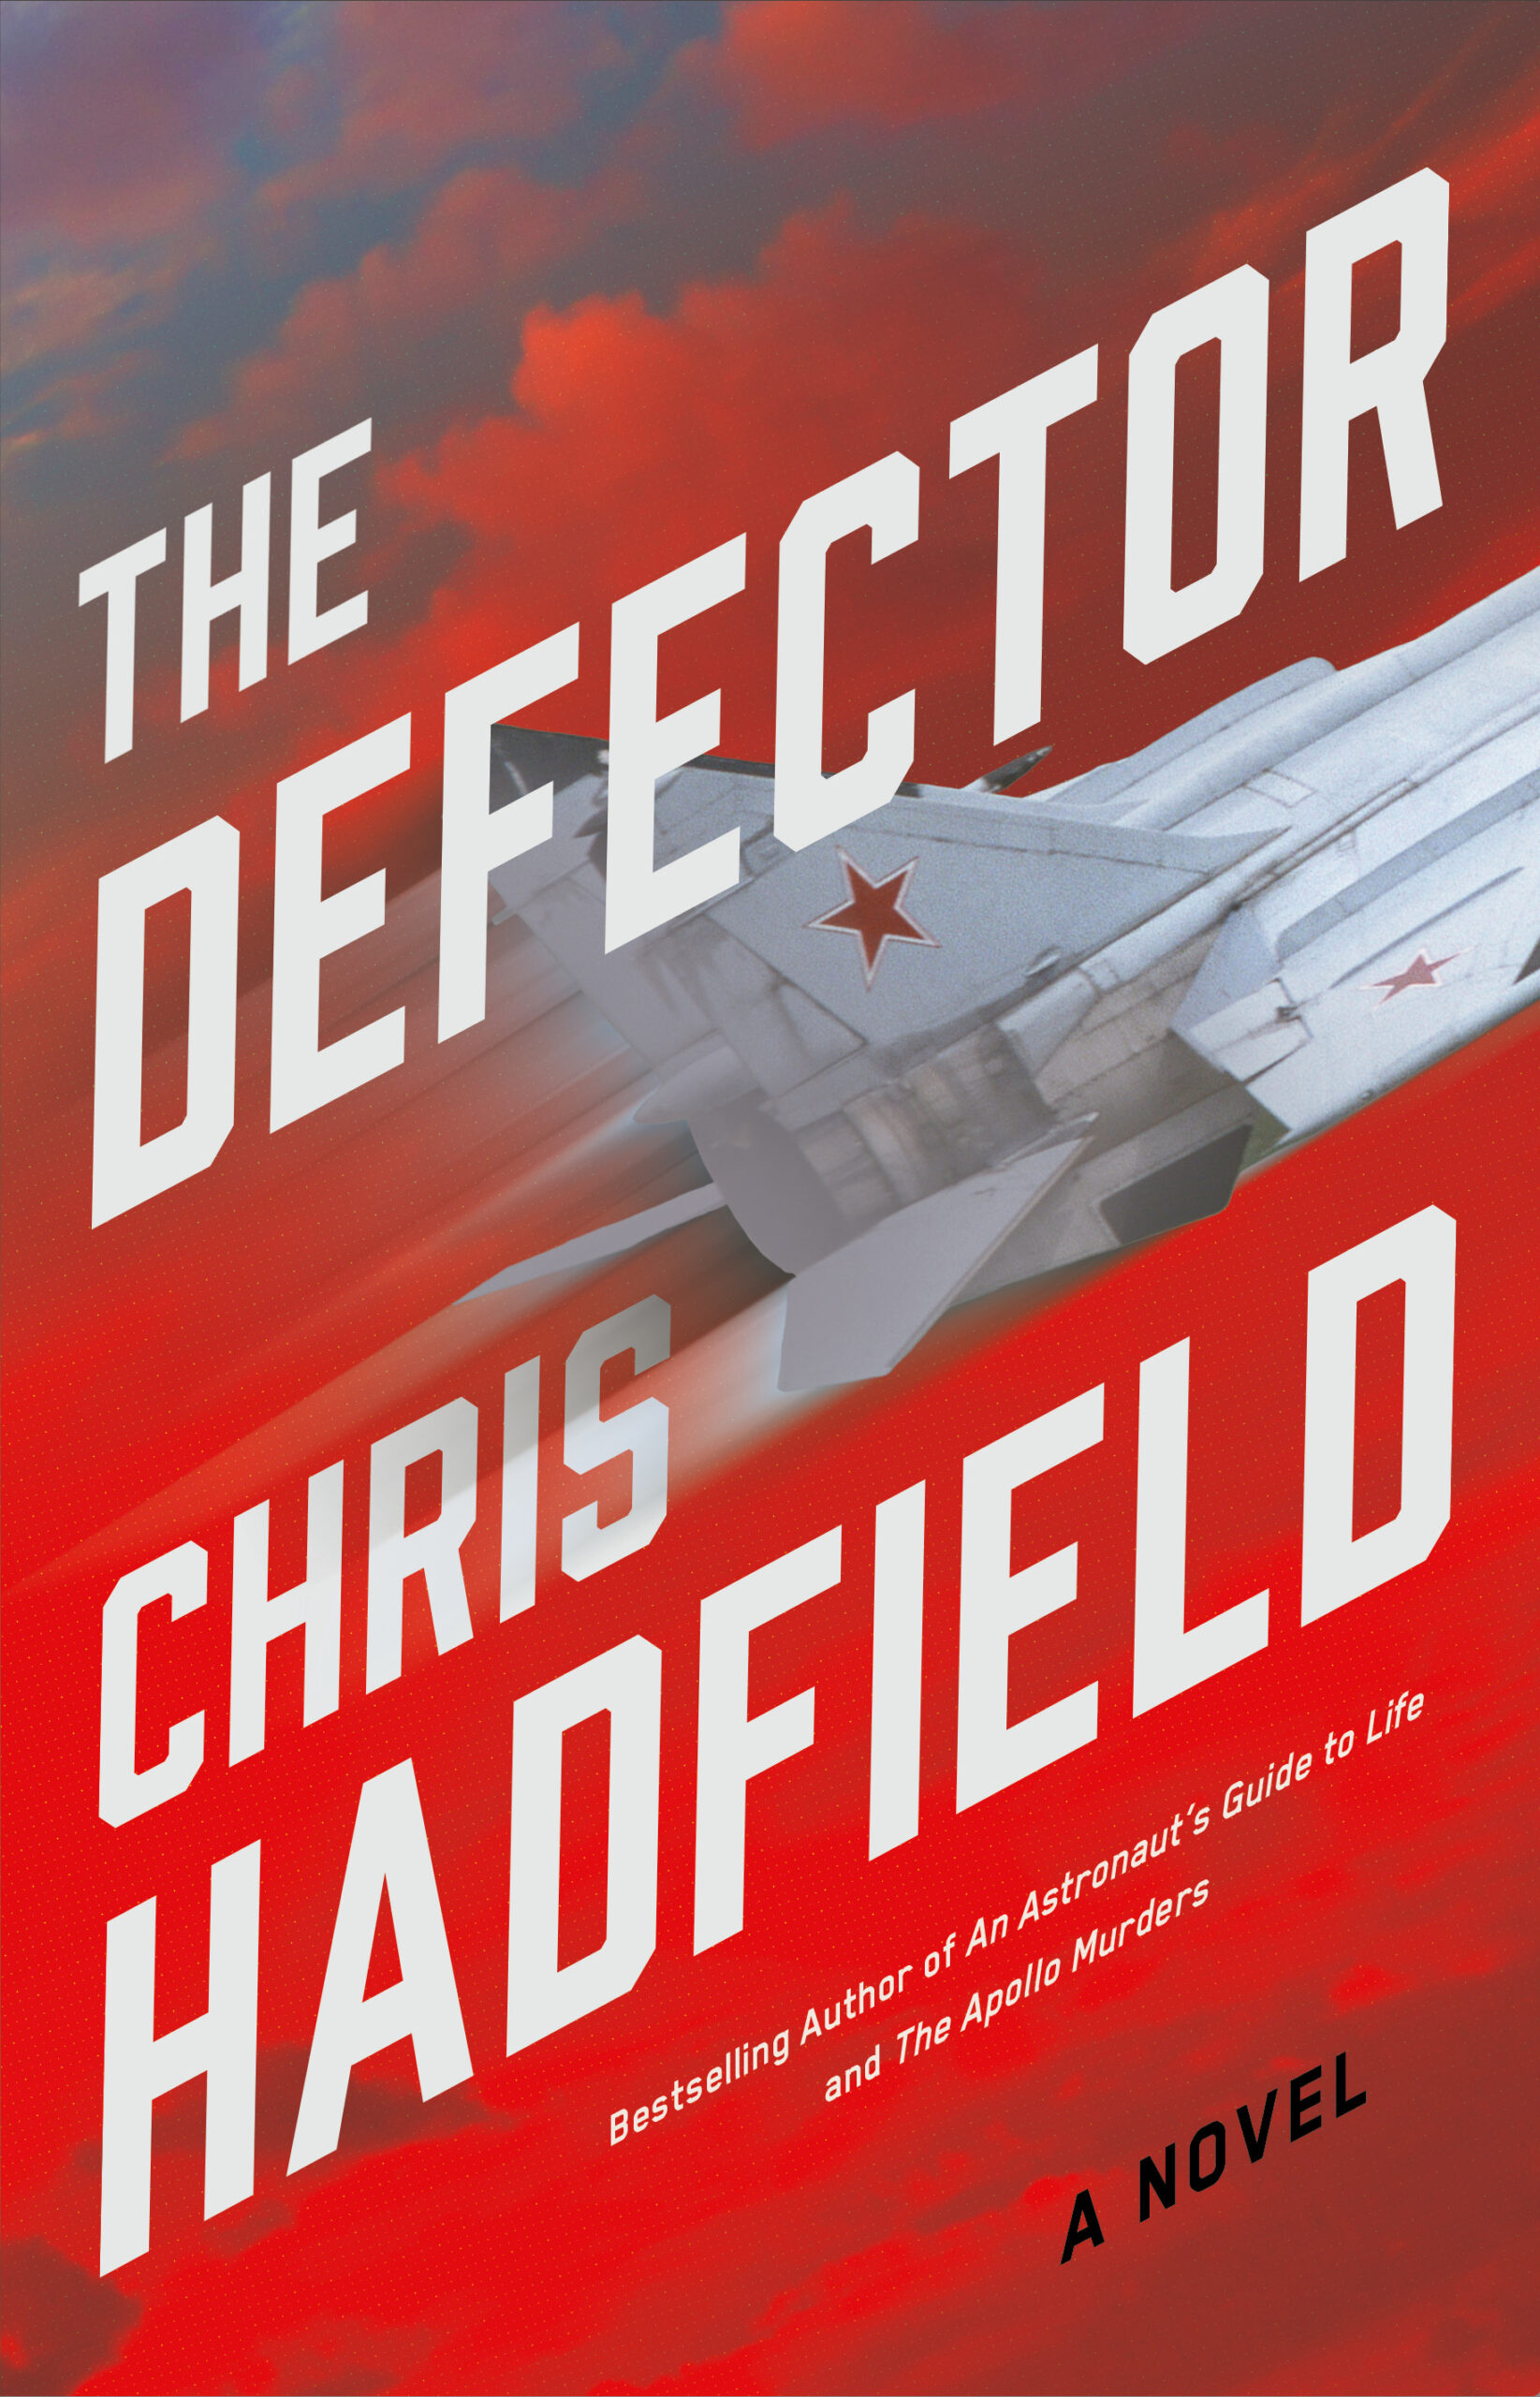 Book cover: The Hunt Begins - The Defector by Chris Hadfield, #1 bestselling author of The Apollo Murders - US version